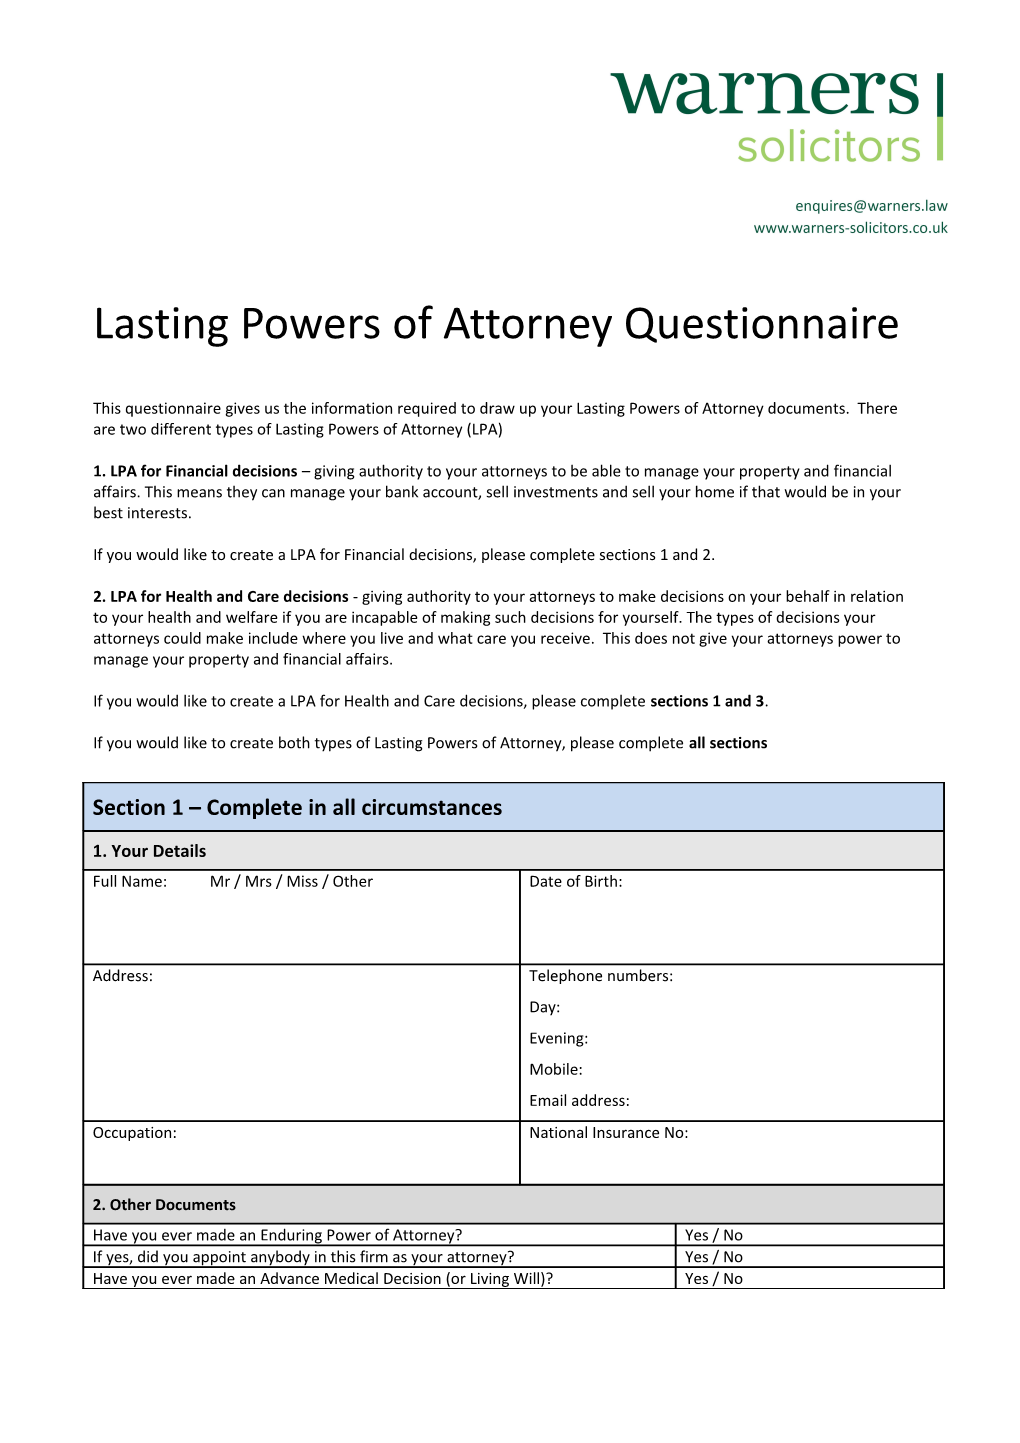 Lasting Powers of Attorney Questionnaire